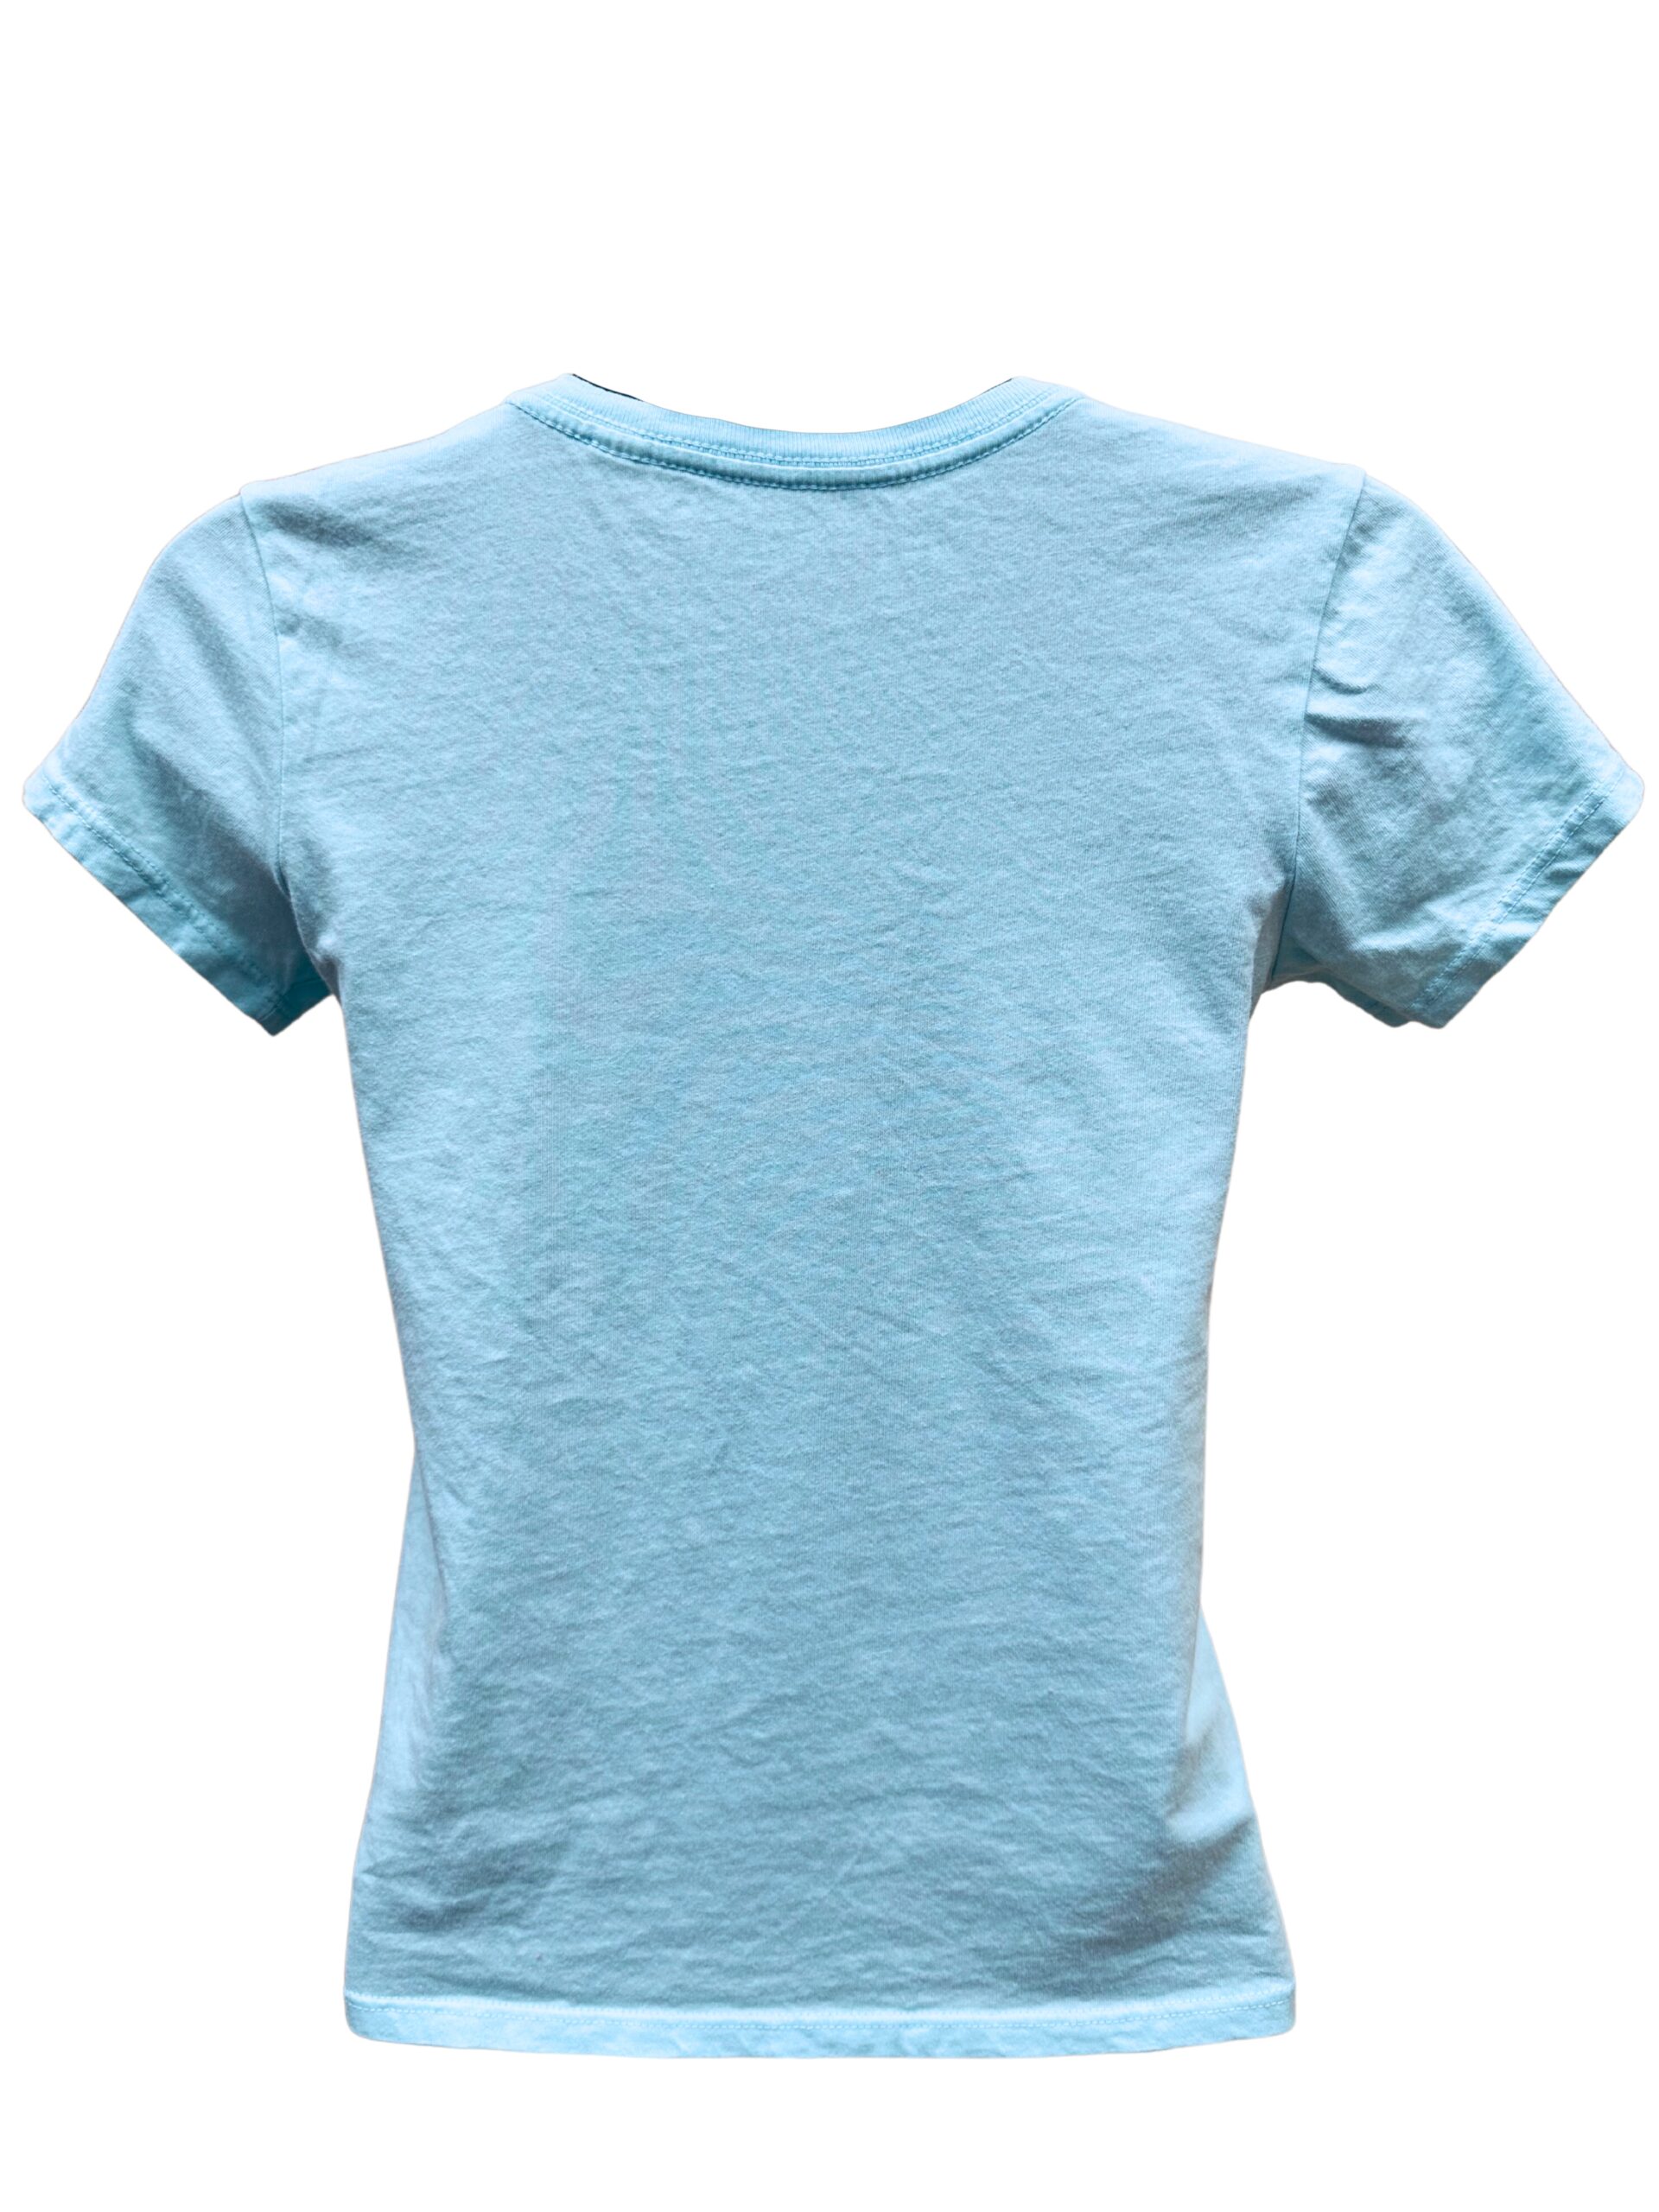 Classic Palm Tee Teal Kid’s - Coconut Jack's Waterfront Grille